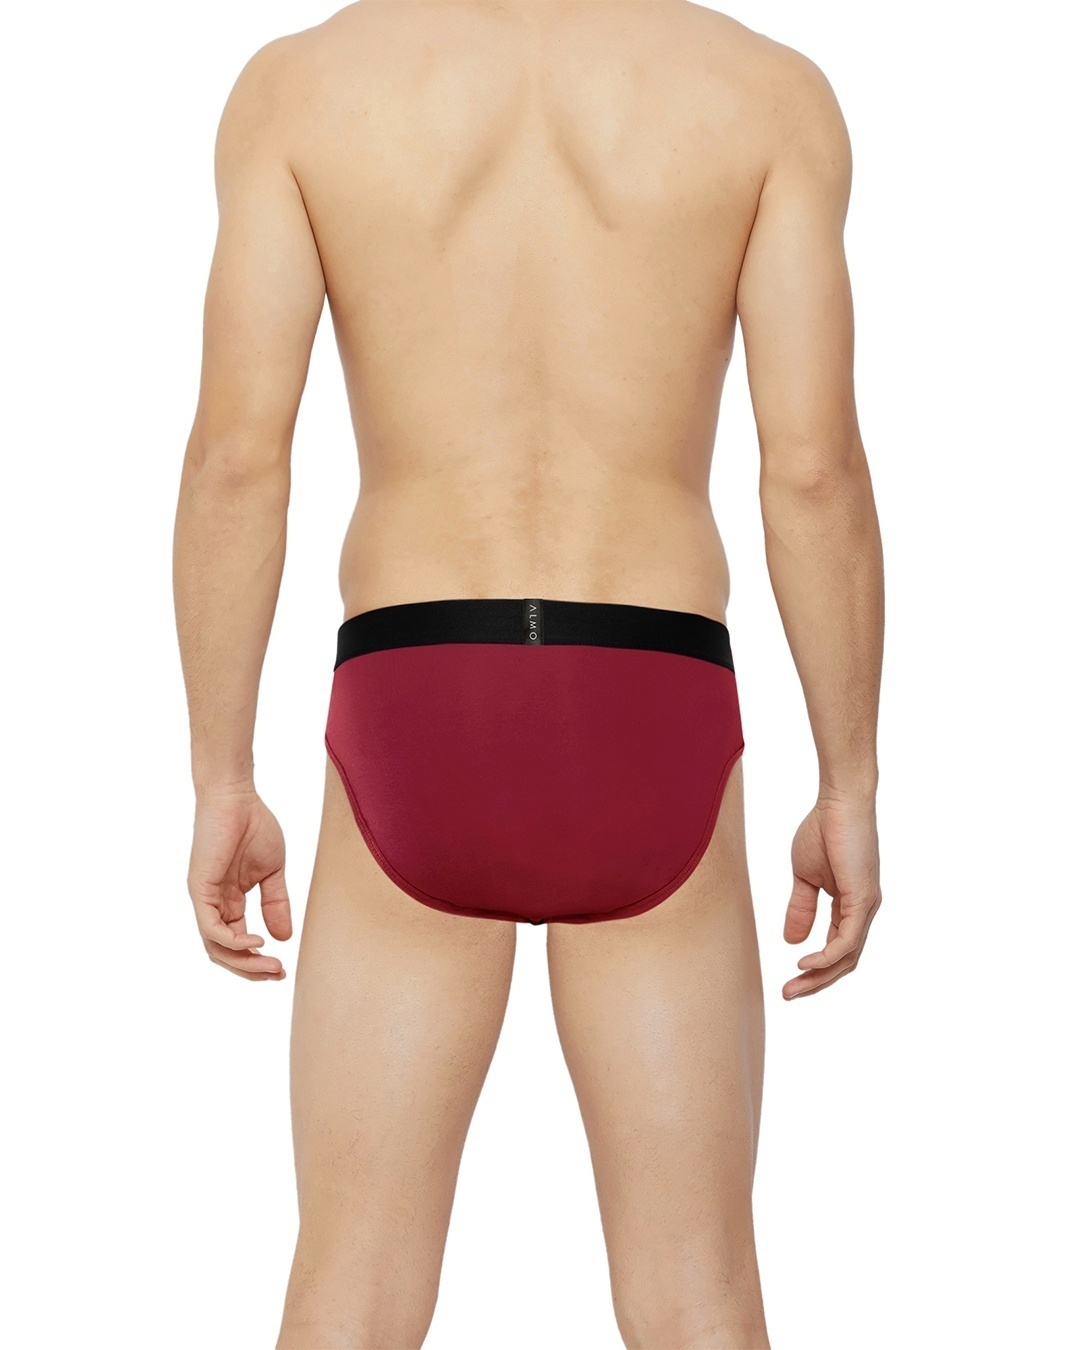 Shop Dario Solid Micro Modal Black, Red And Grey Men's Brief (Pack Of 3)